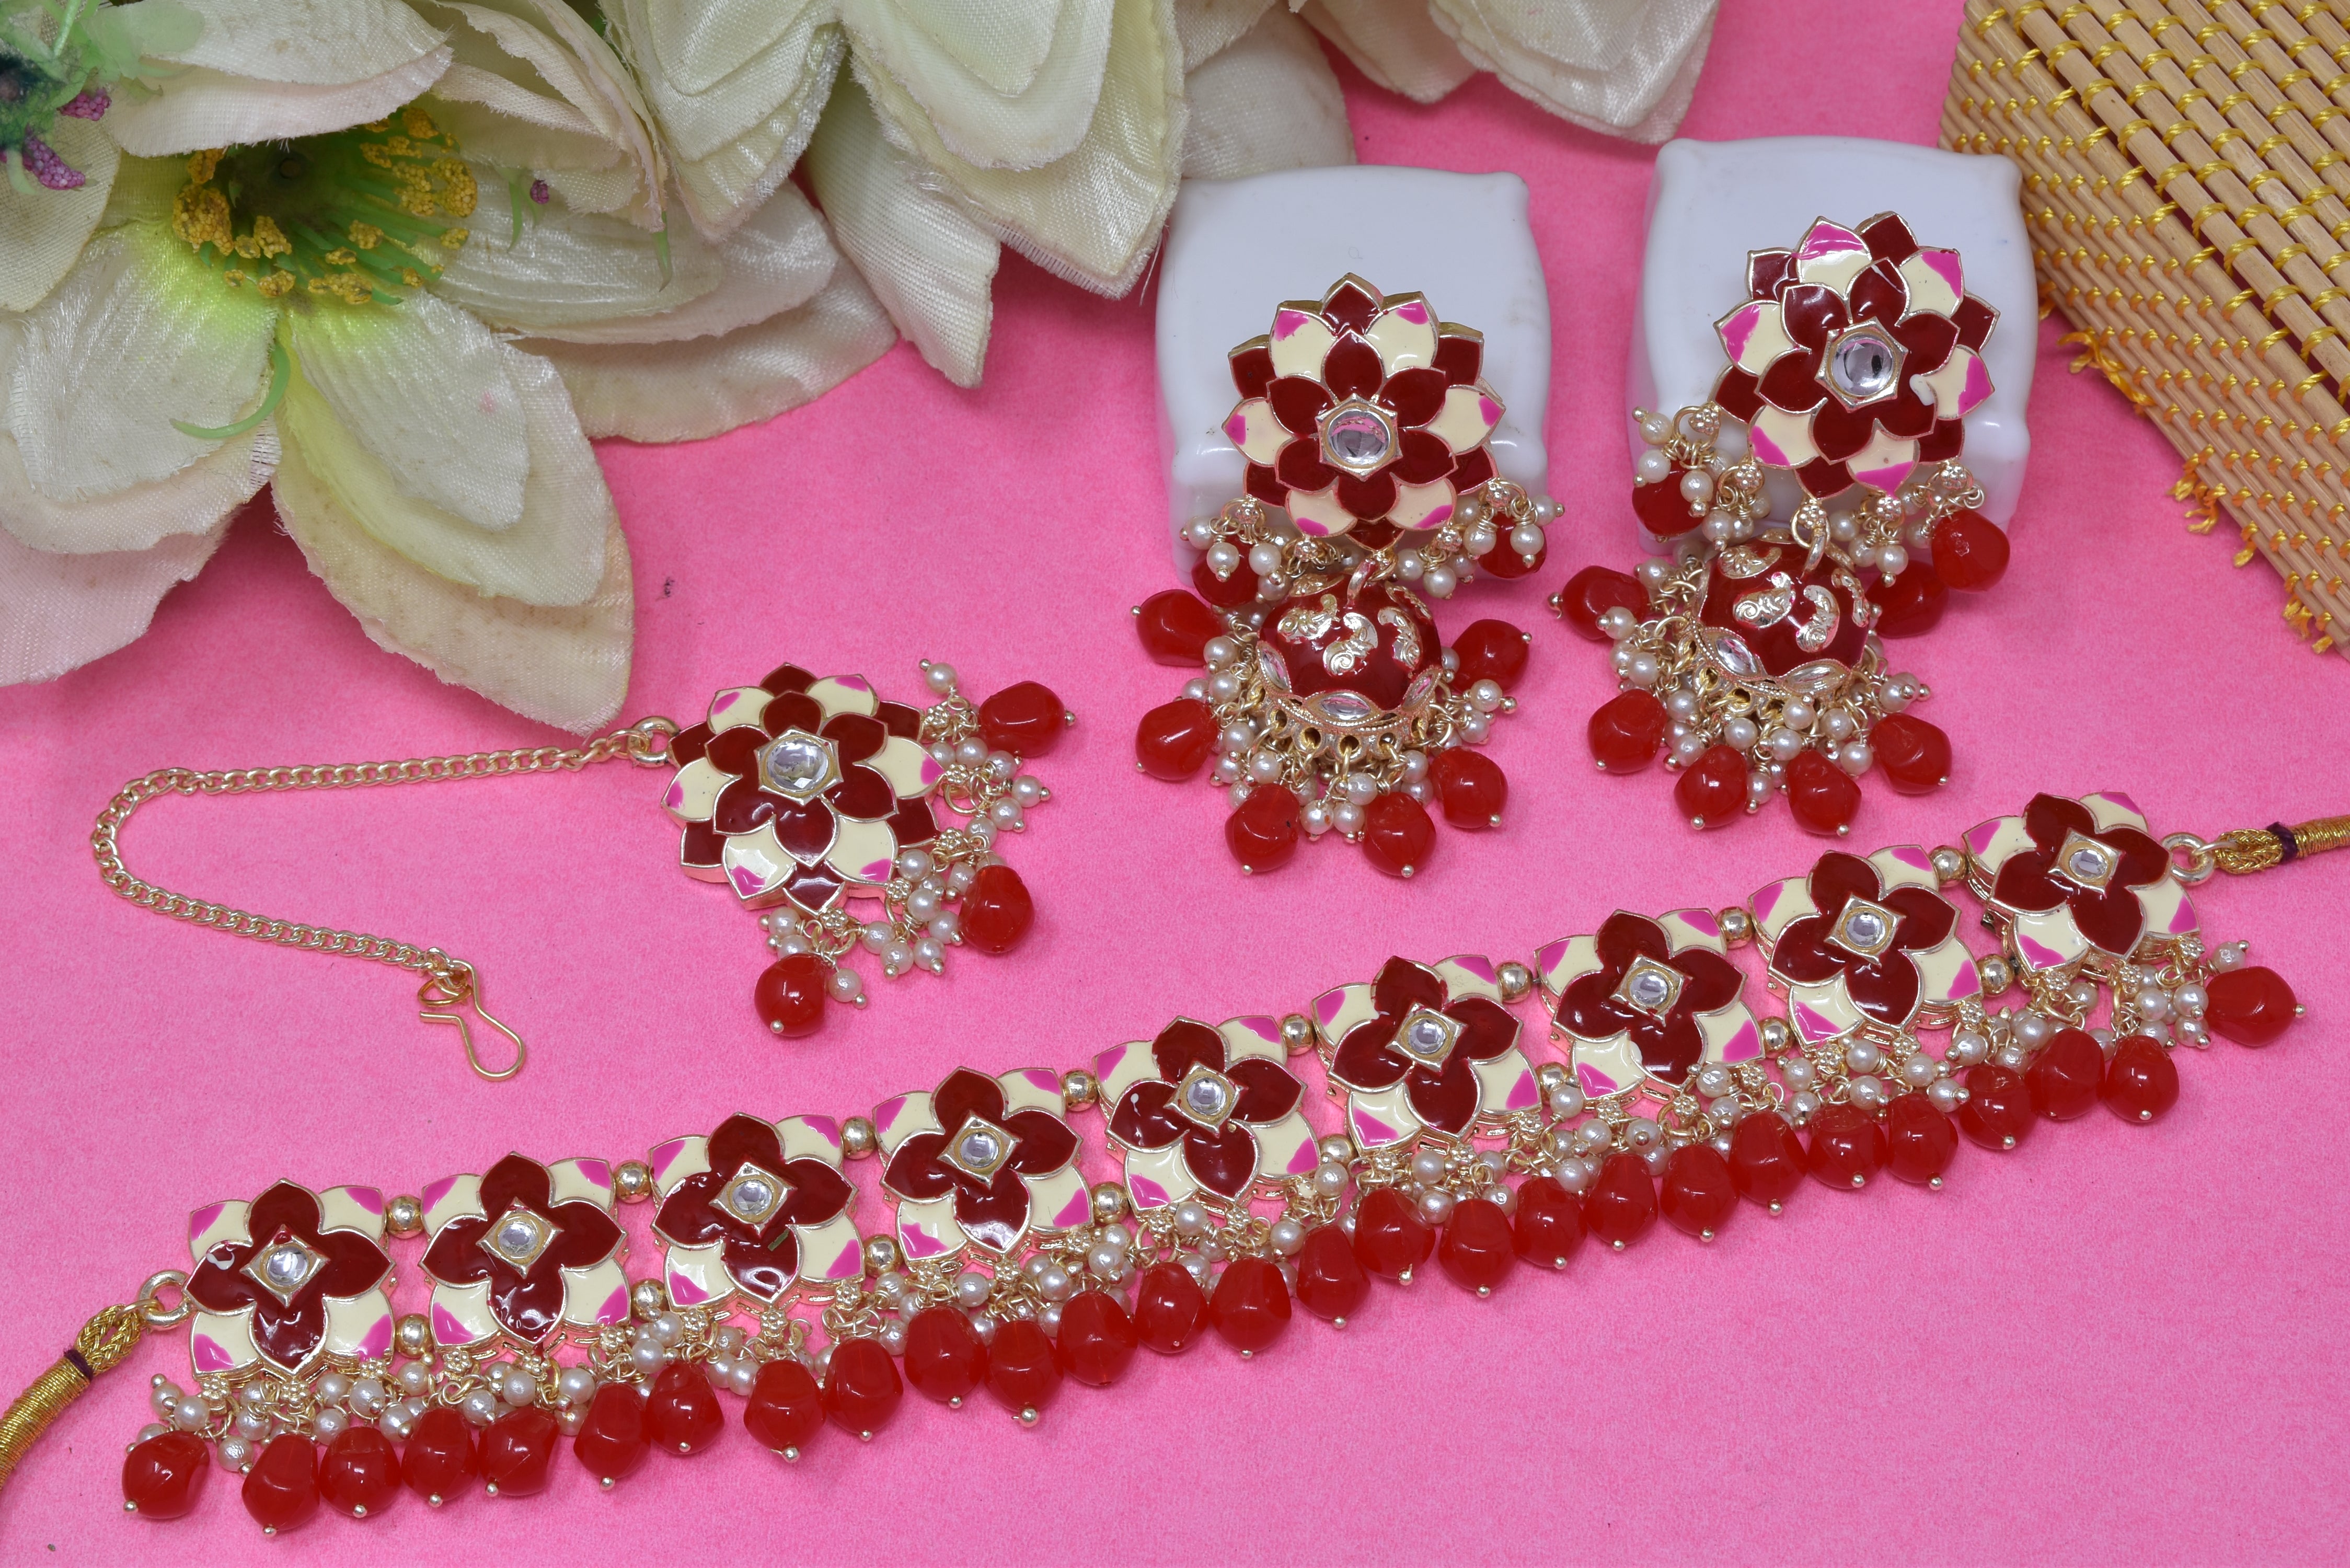 Alloy gold plated Red Meenakari with kundan n pearl necklace choker set for women n girls